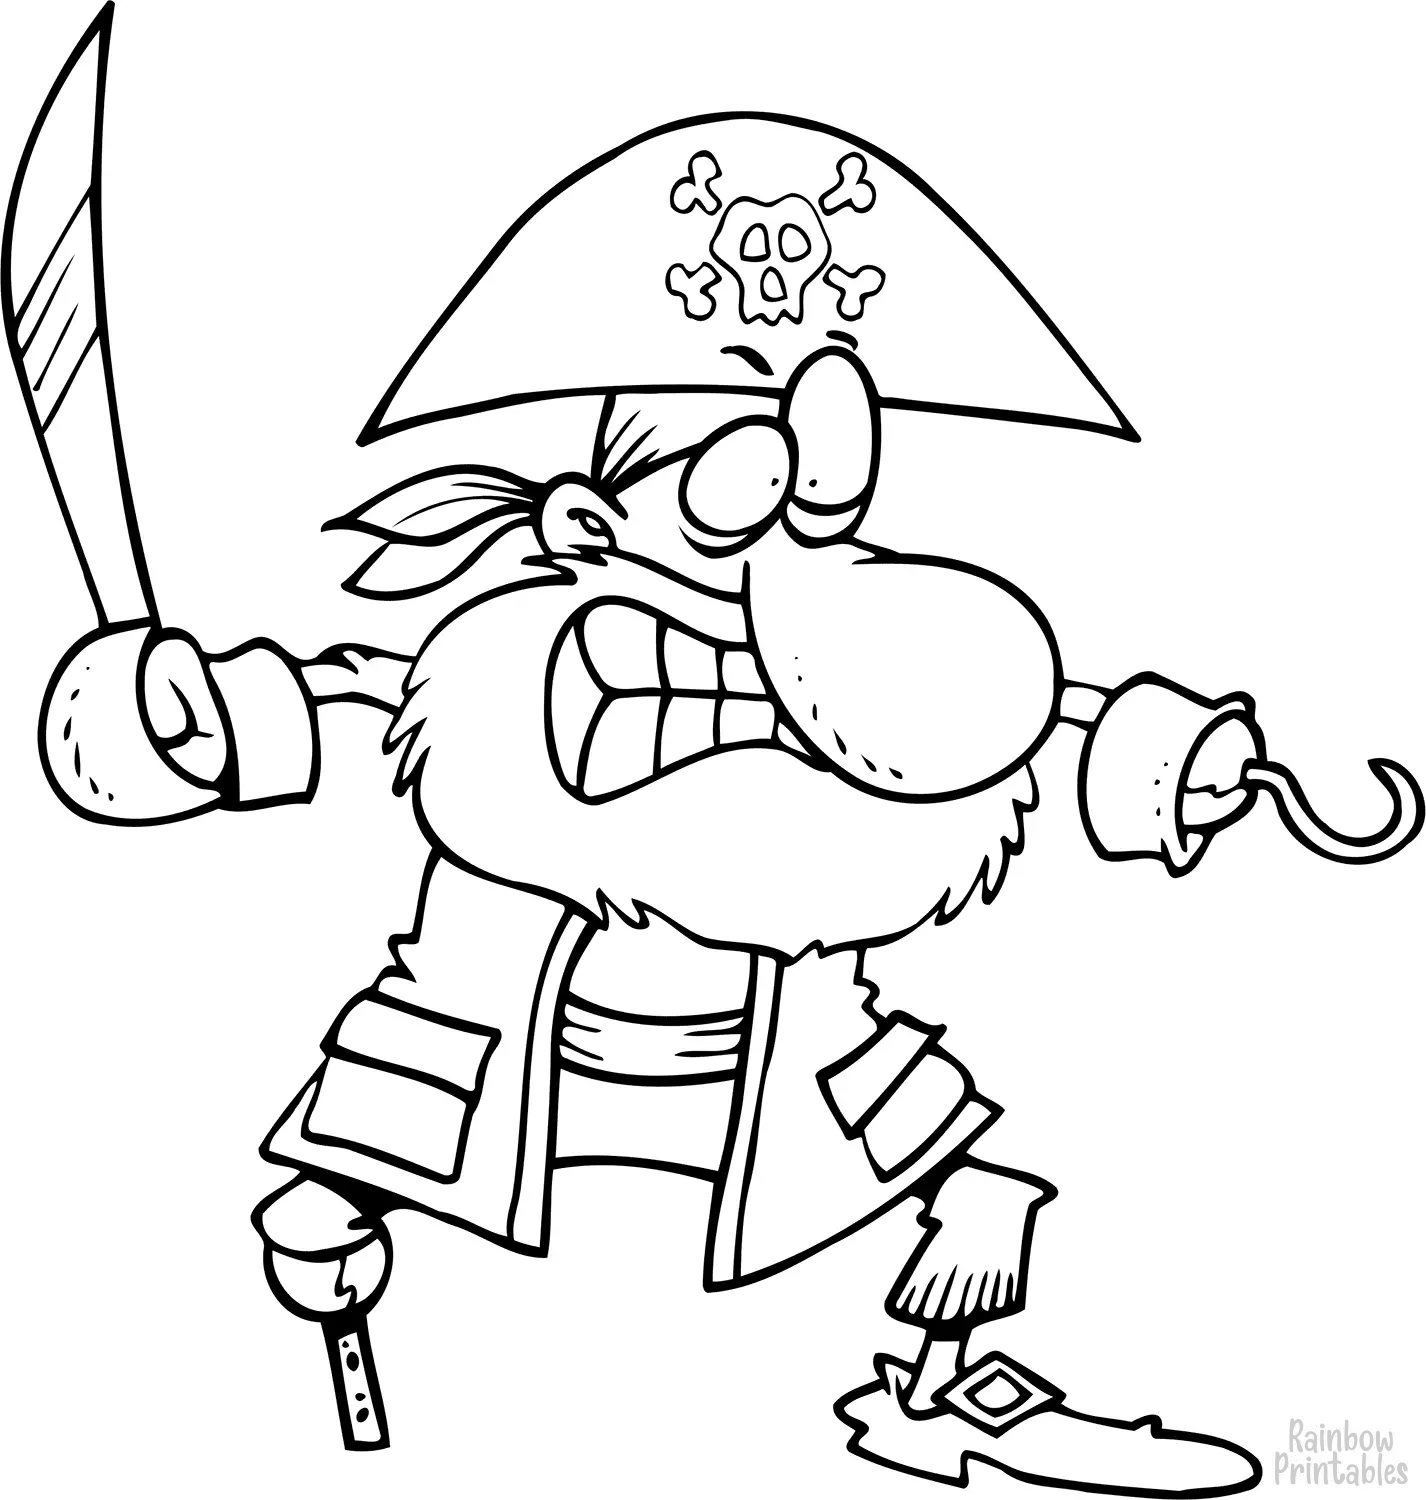 ANGRY FIGHTING PIRATE-cartoon-Free Clipart Coloring Pages for Kids Adults Art Activities Line Art